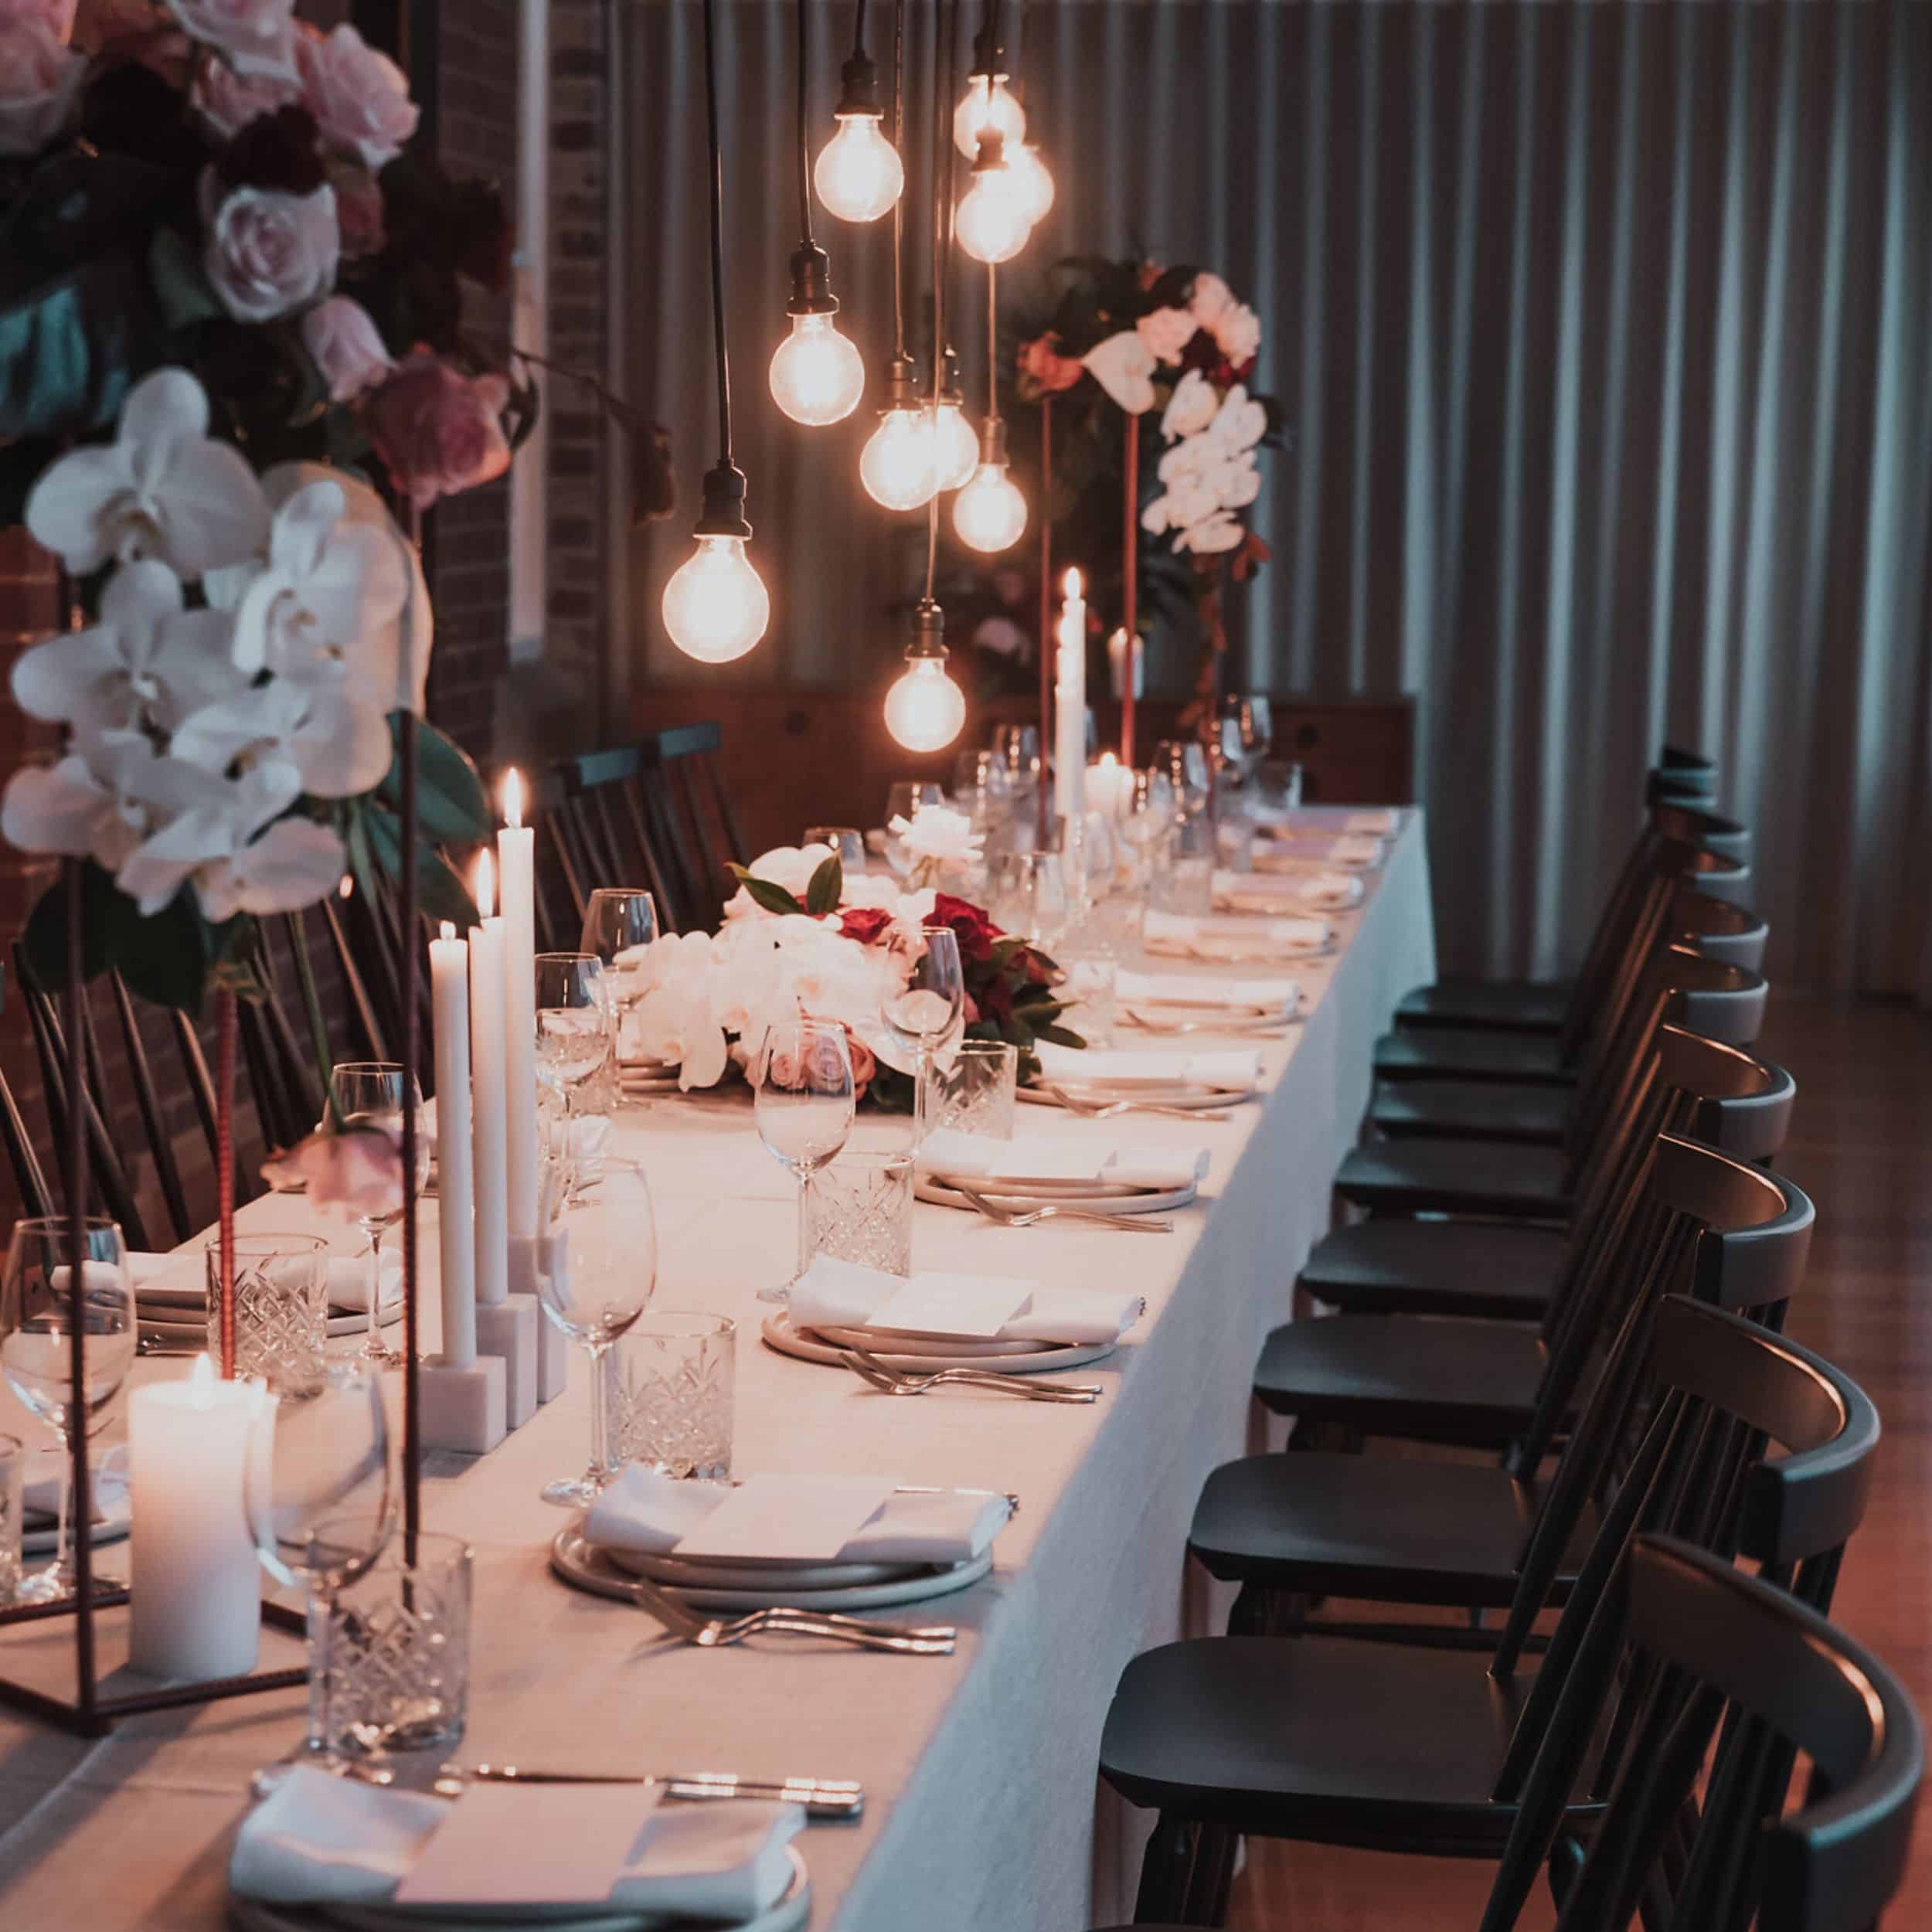 Hobart Events | Wedding Festoon Pendant Lighting Hire at The Agrarian Kitchen Eatery